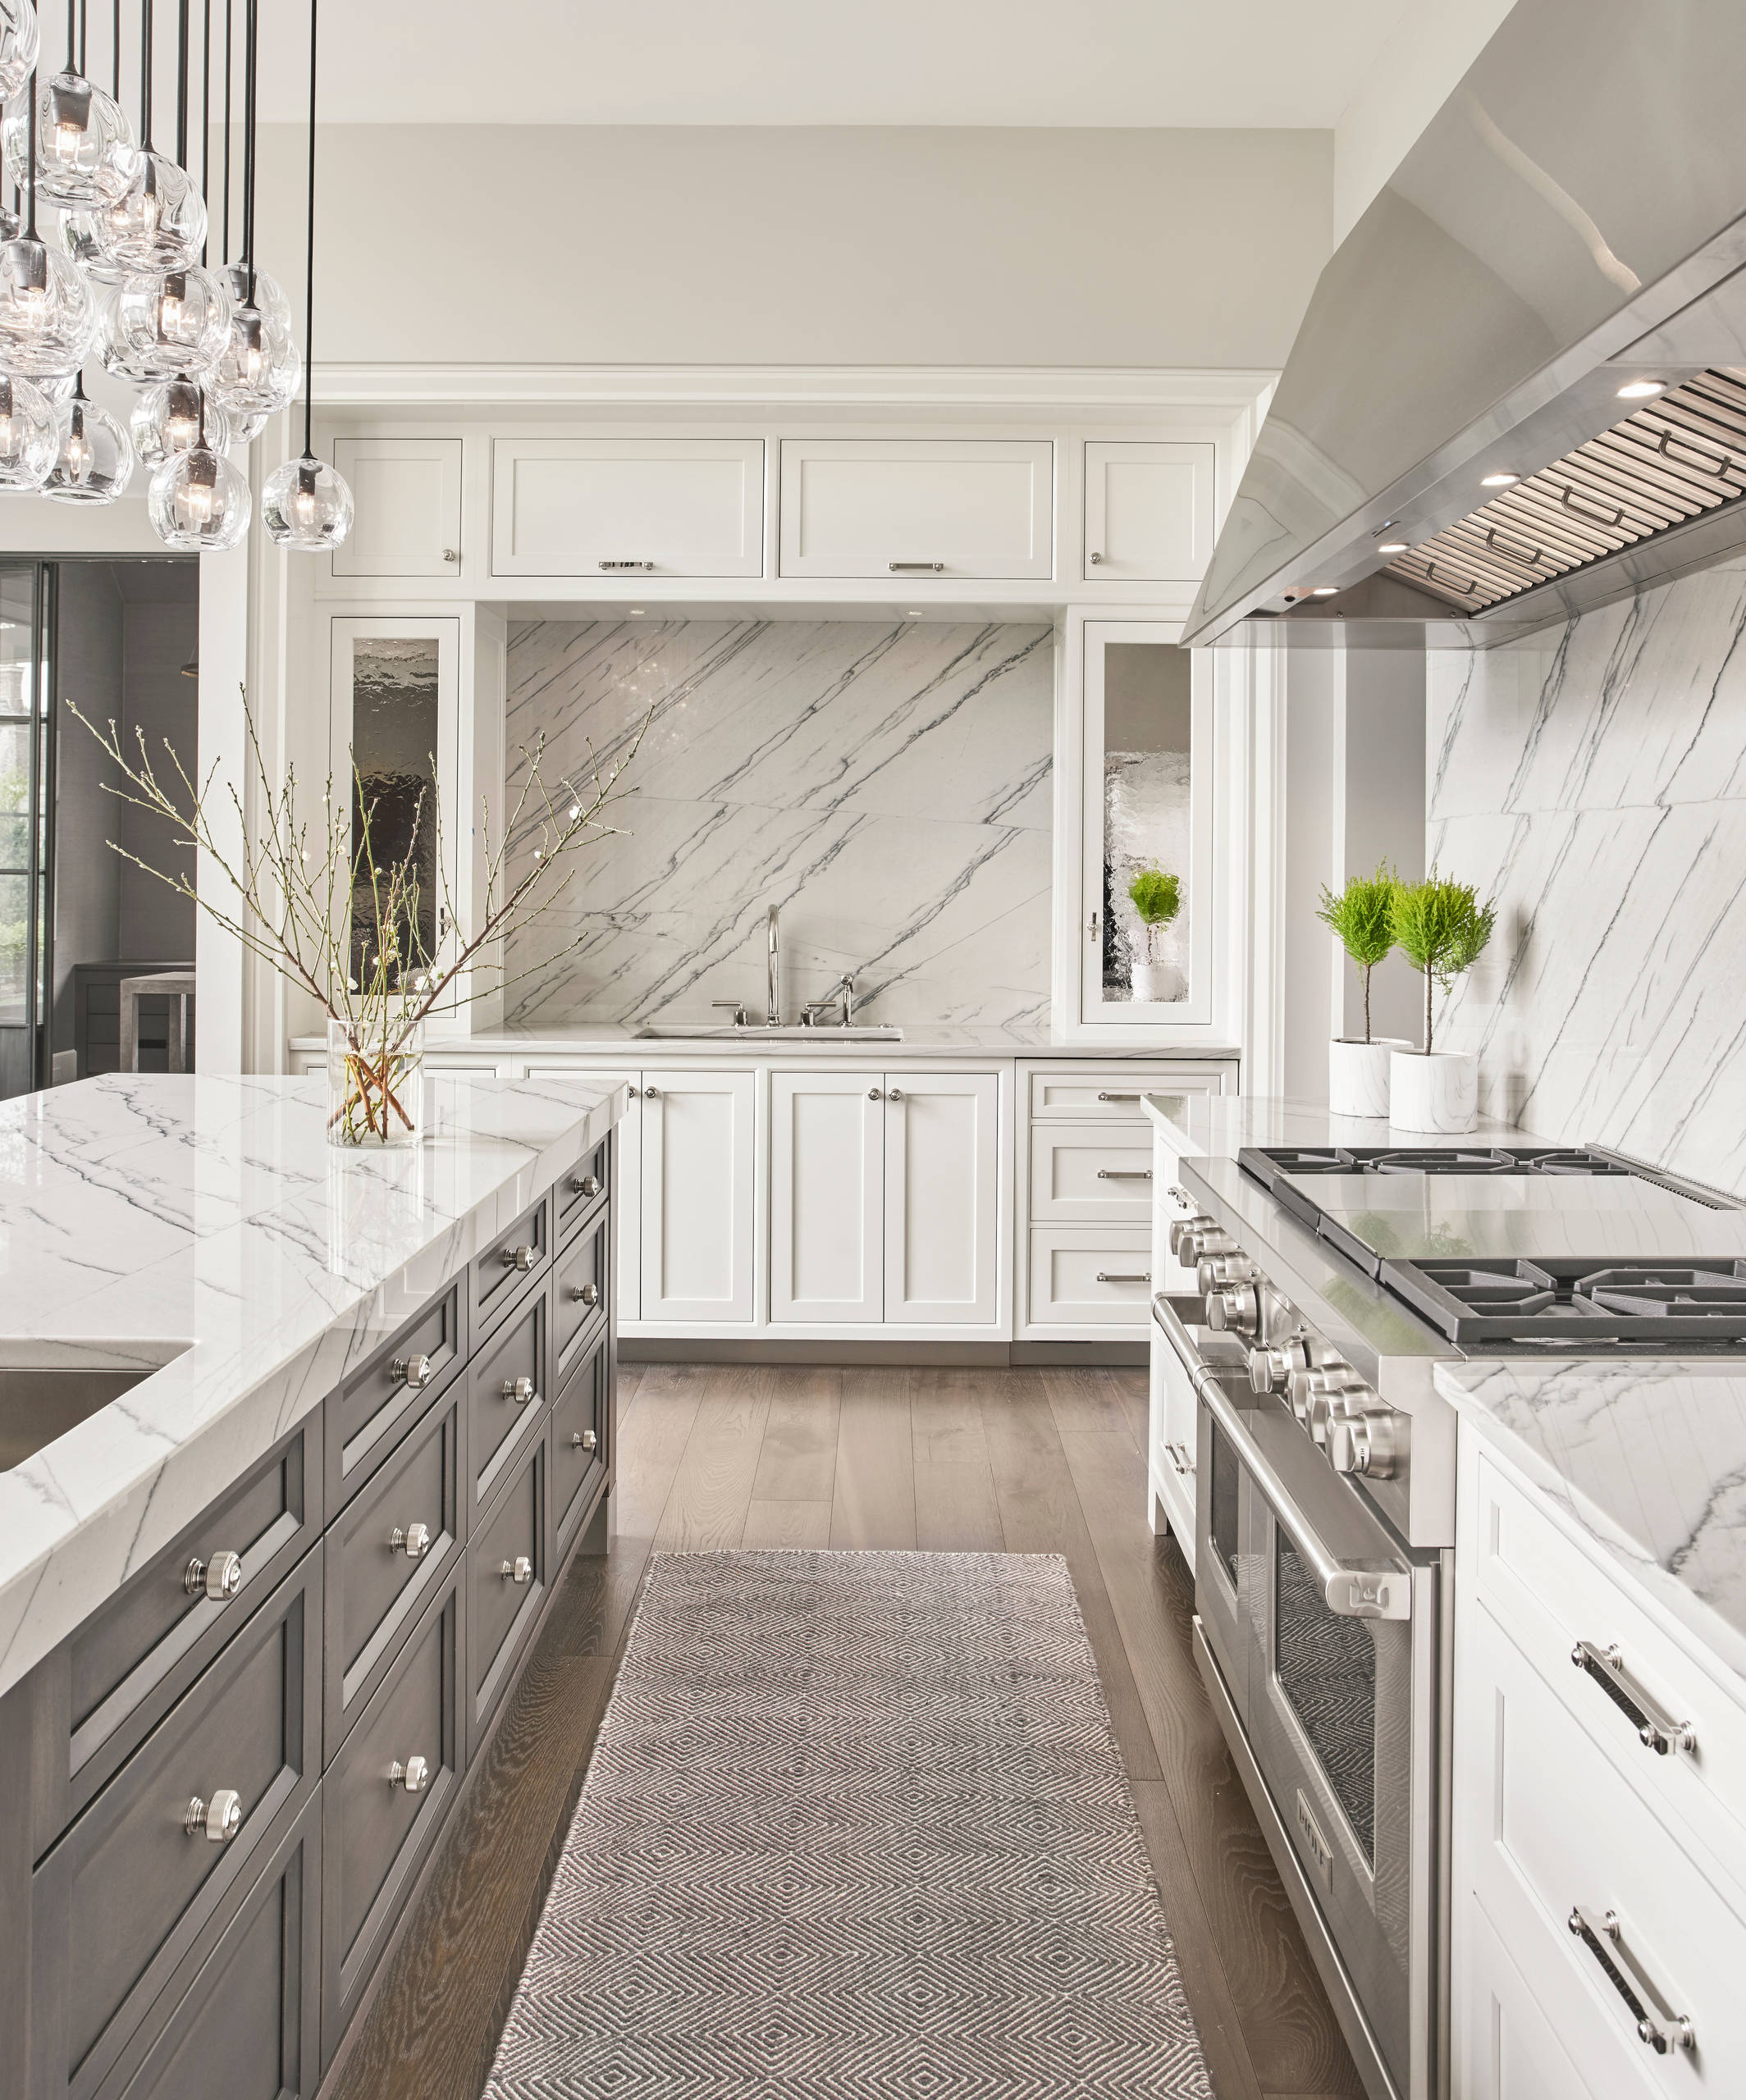 Contrasting Grey Island & White Perimeter Cabinetry - Transitional - Kitchen  - Chicago - by Abruzzo Kitchen & Bath | Houzz